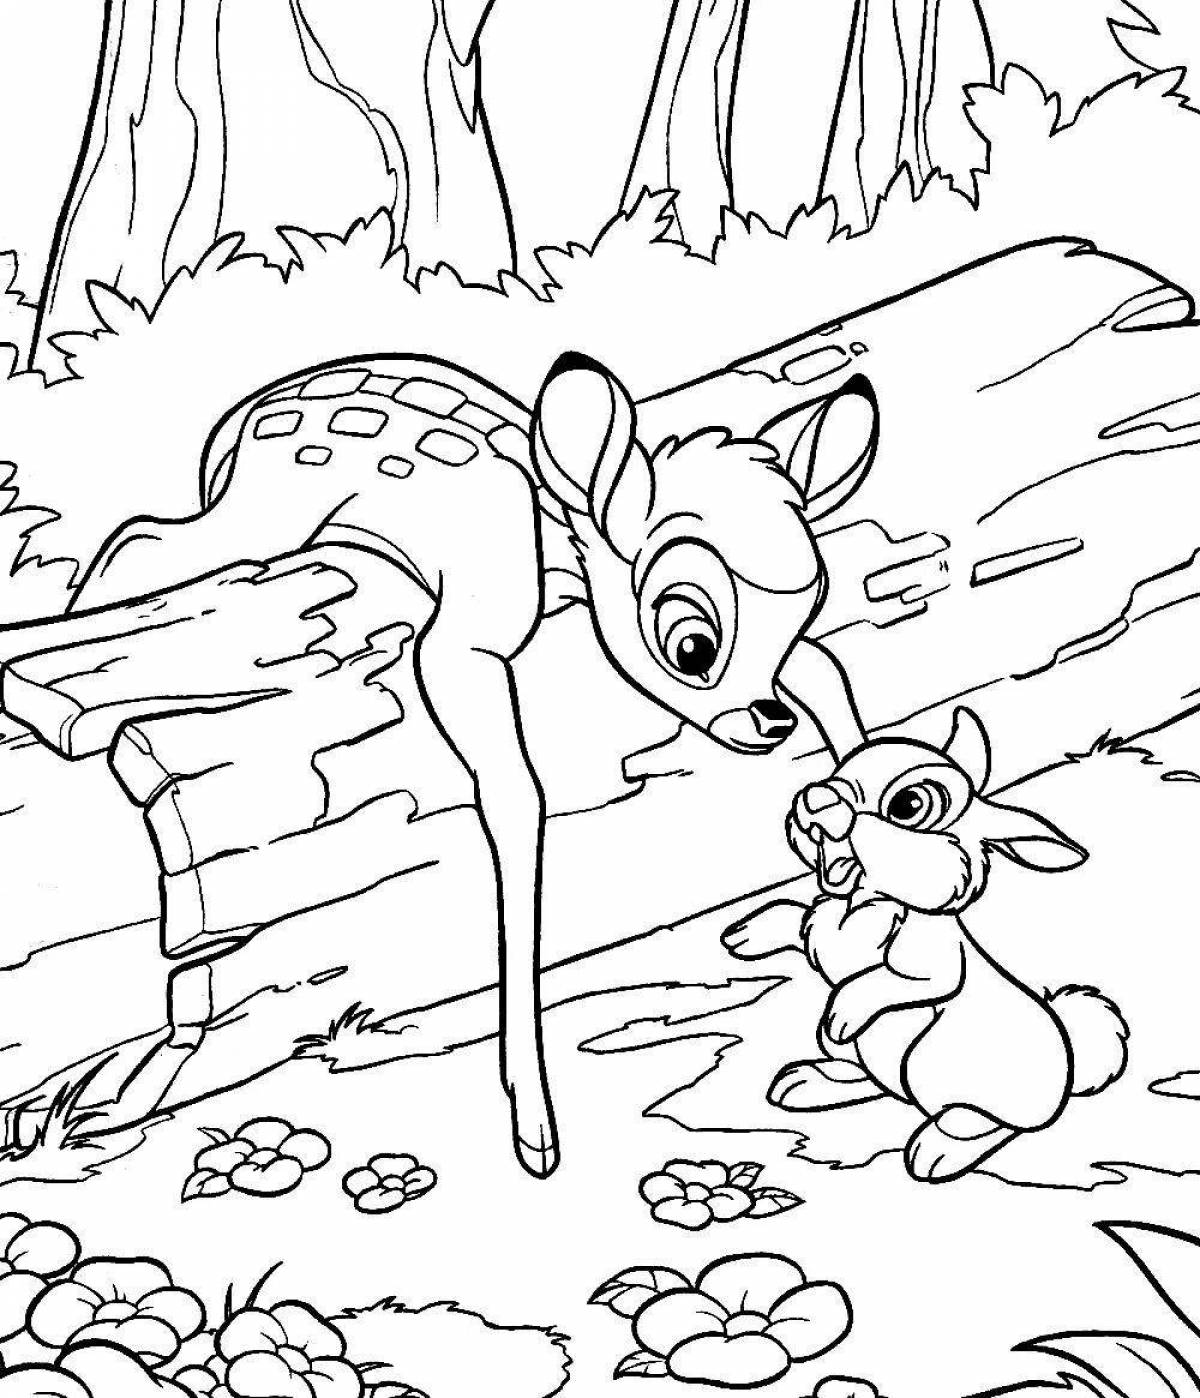 Bambi coloring book for kids